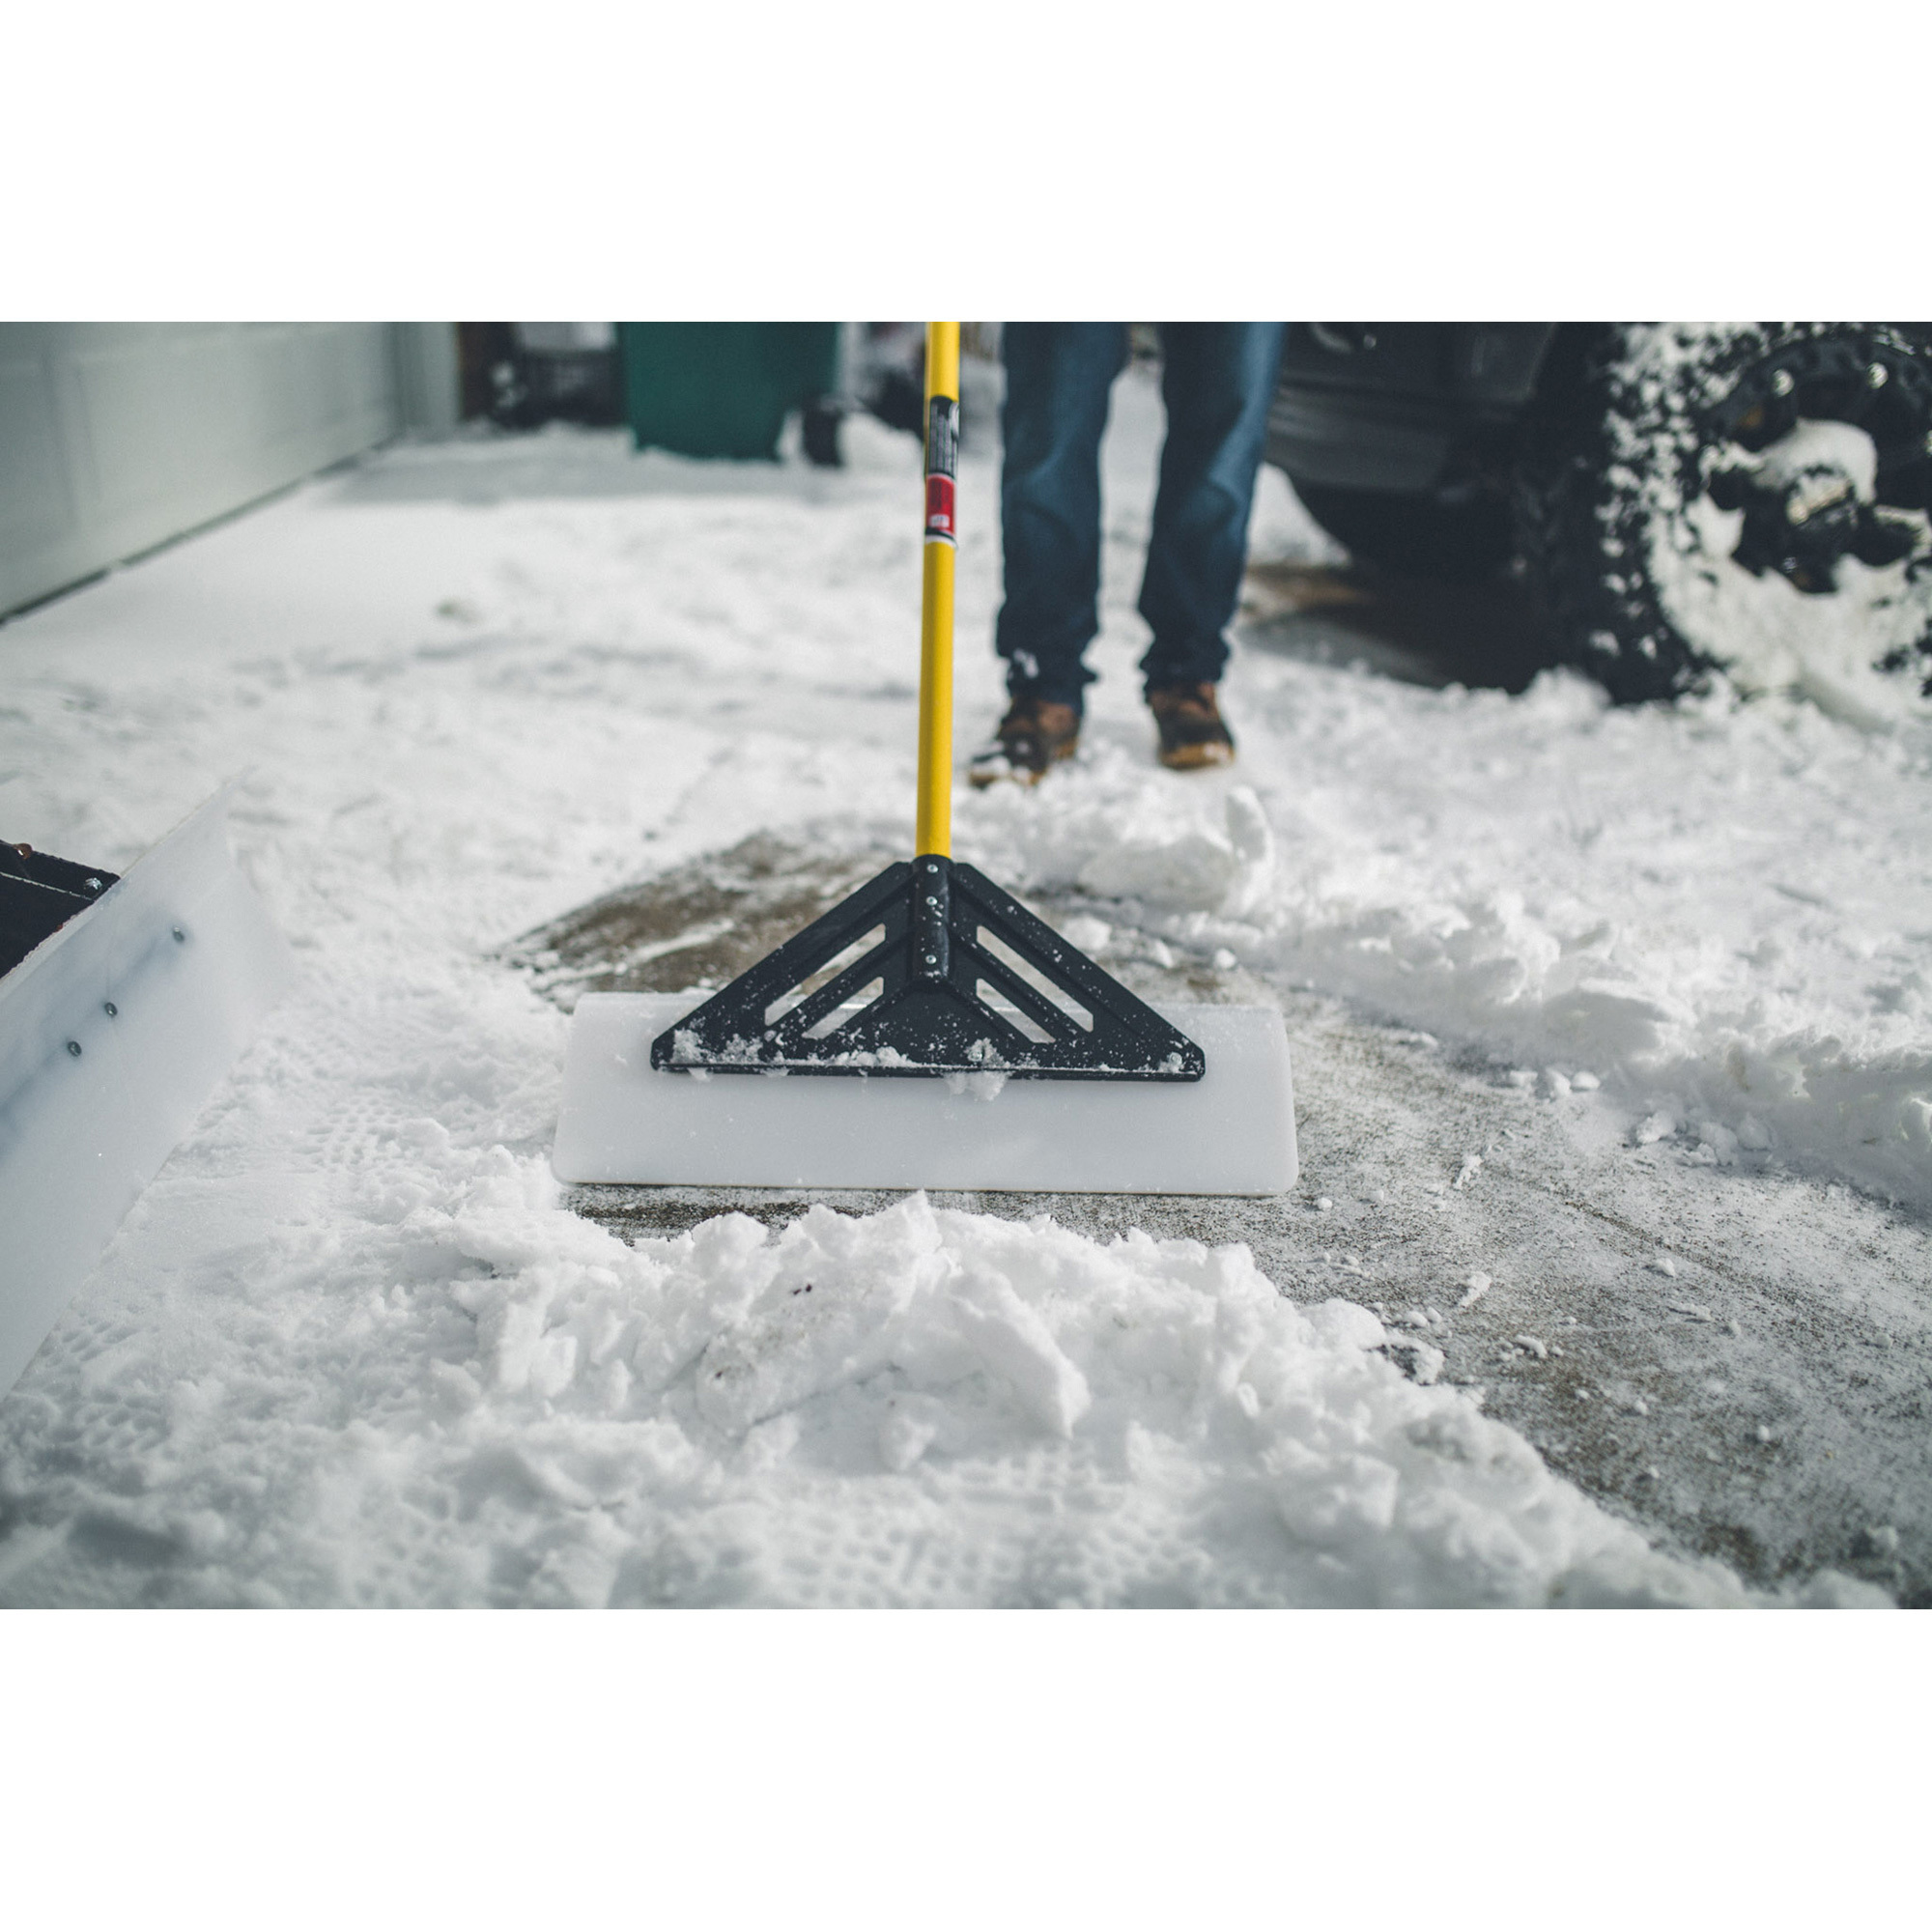 The SnowPlow Snow Pusher — Model# 14A7A5BA011 Northern Tool